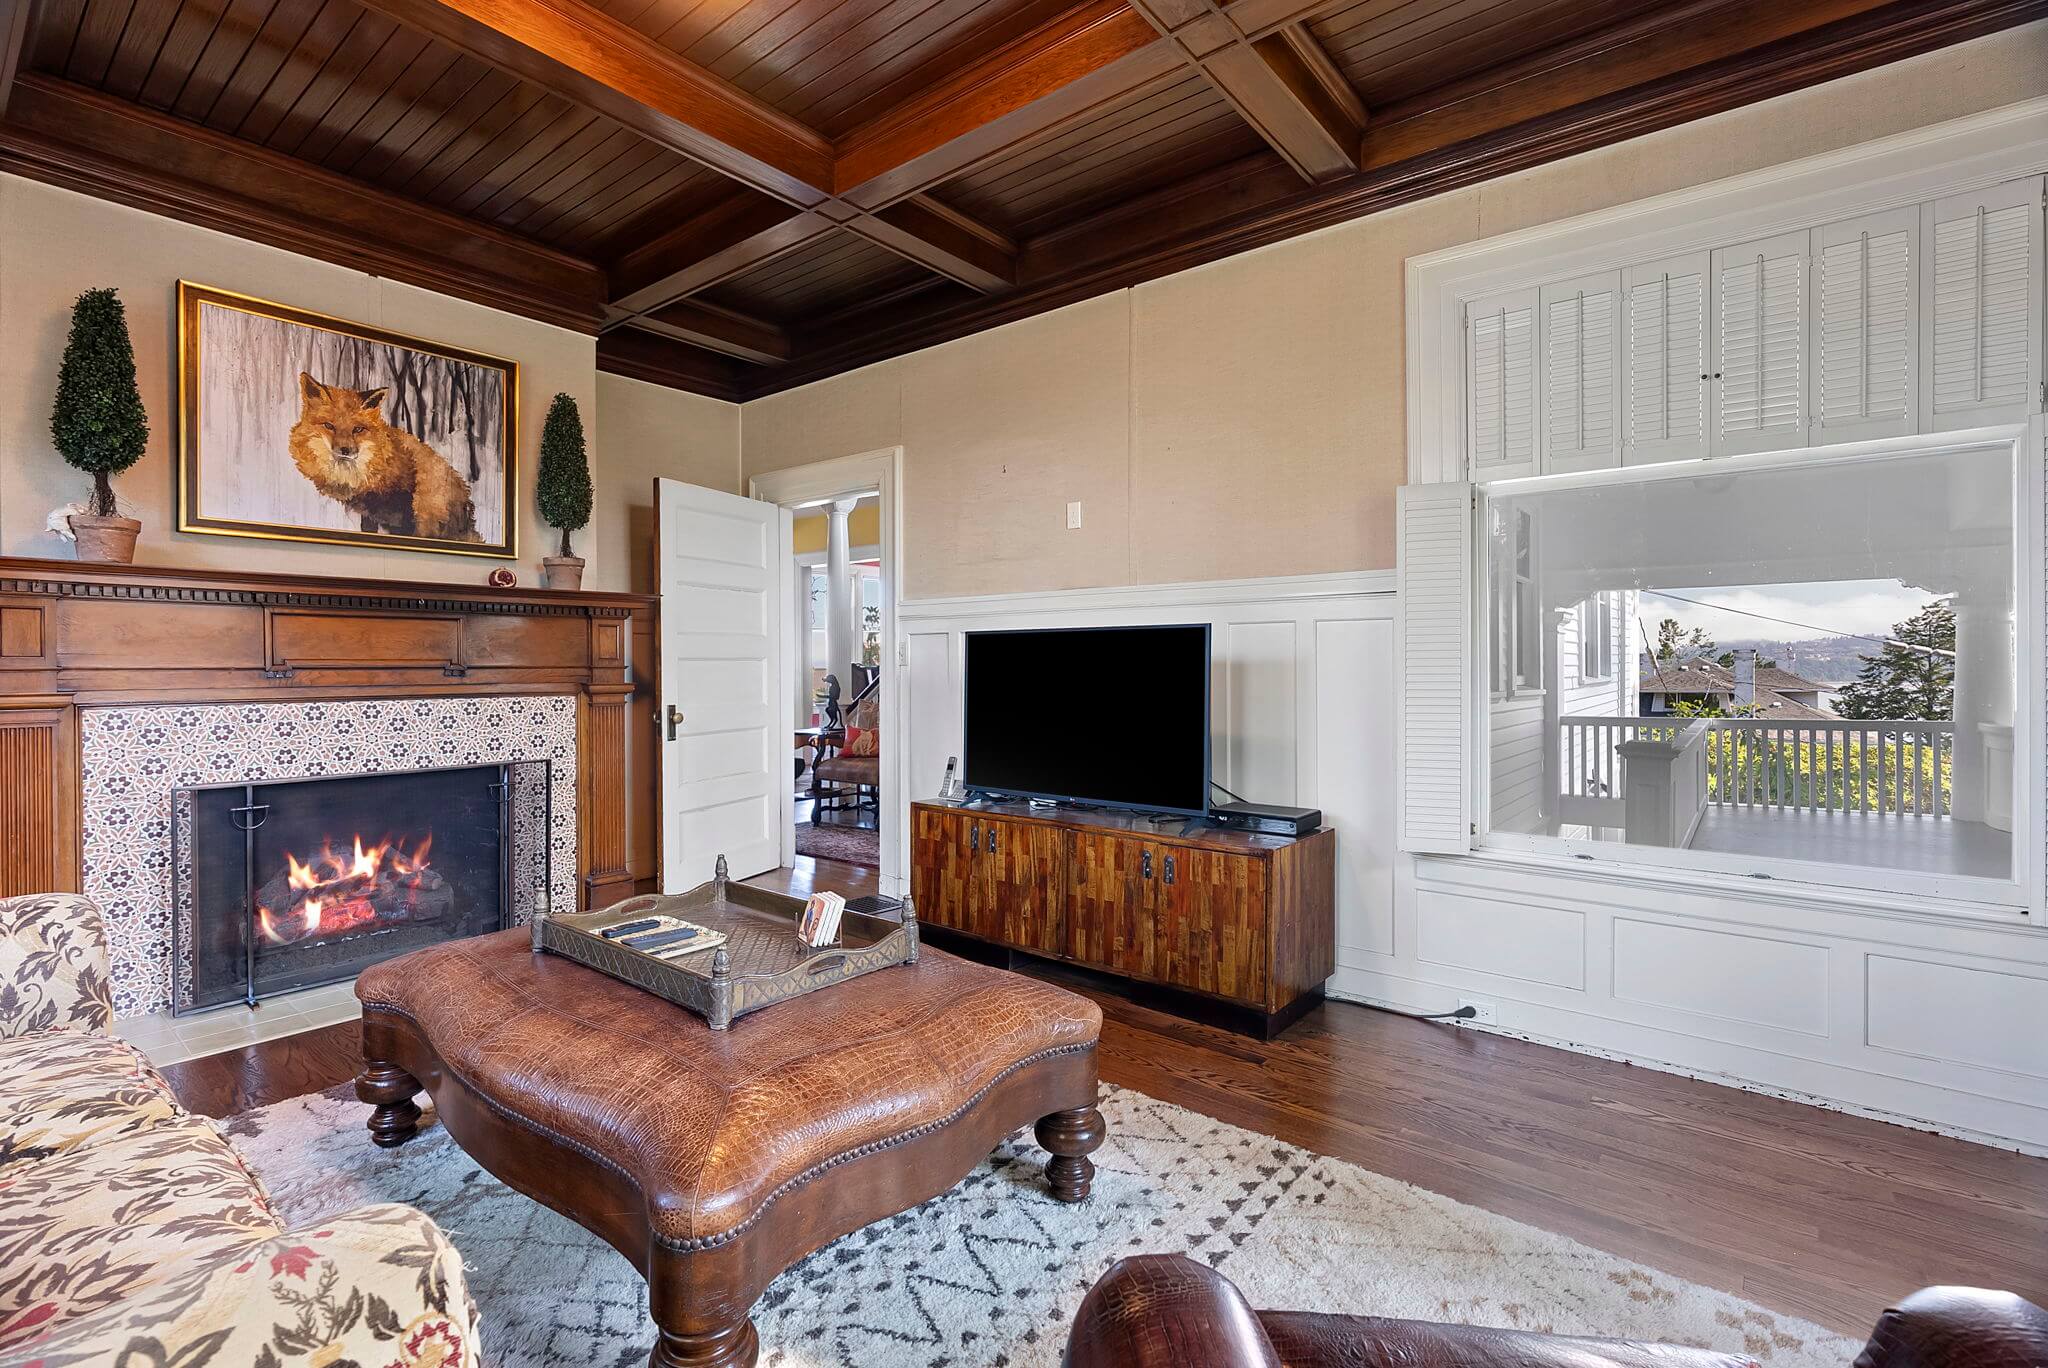 Library features a large fireplace with original mantle and vintage tile surround